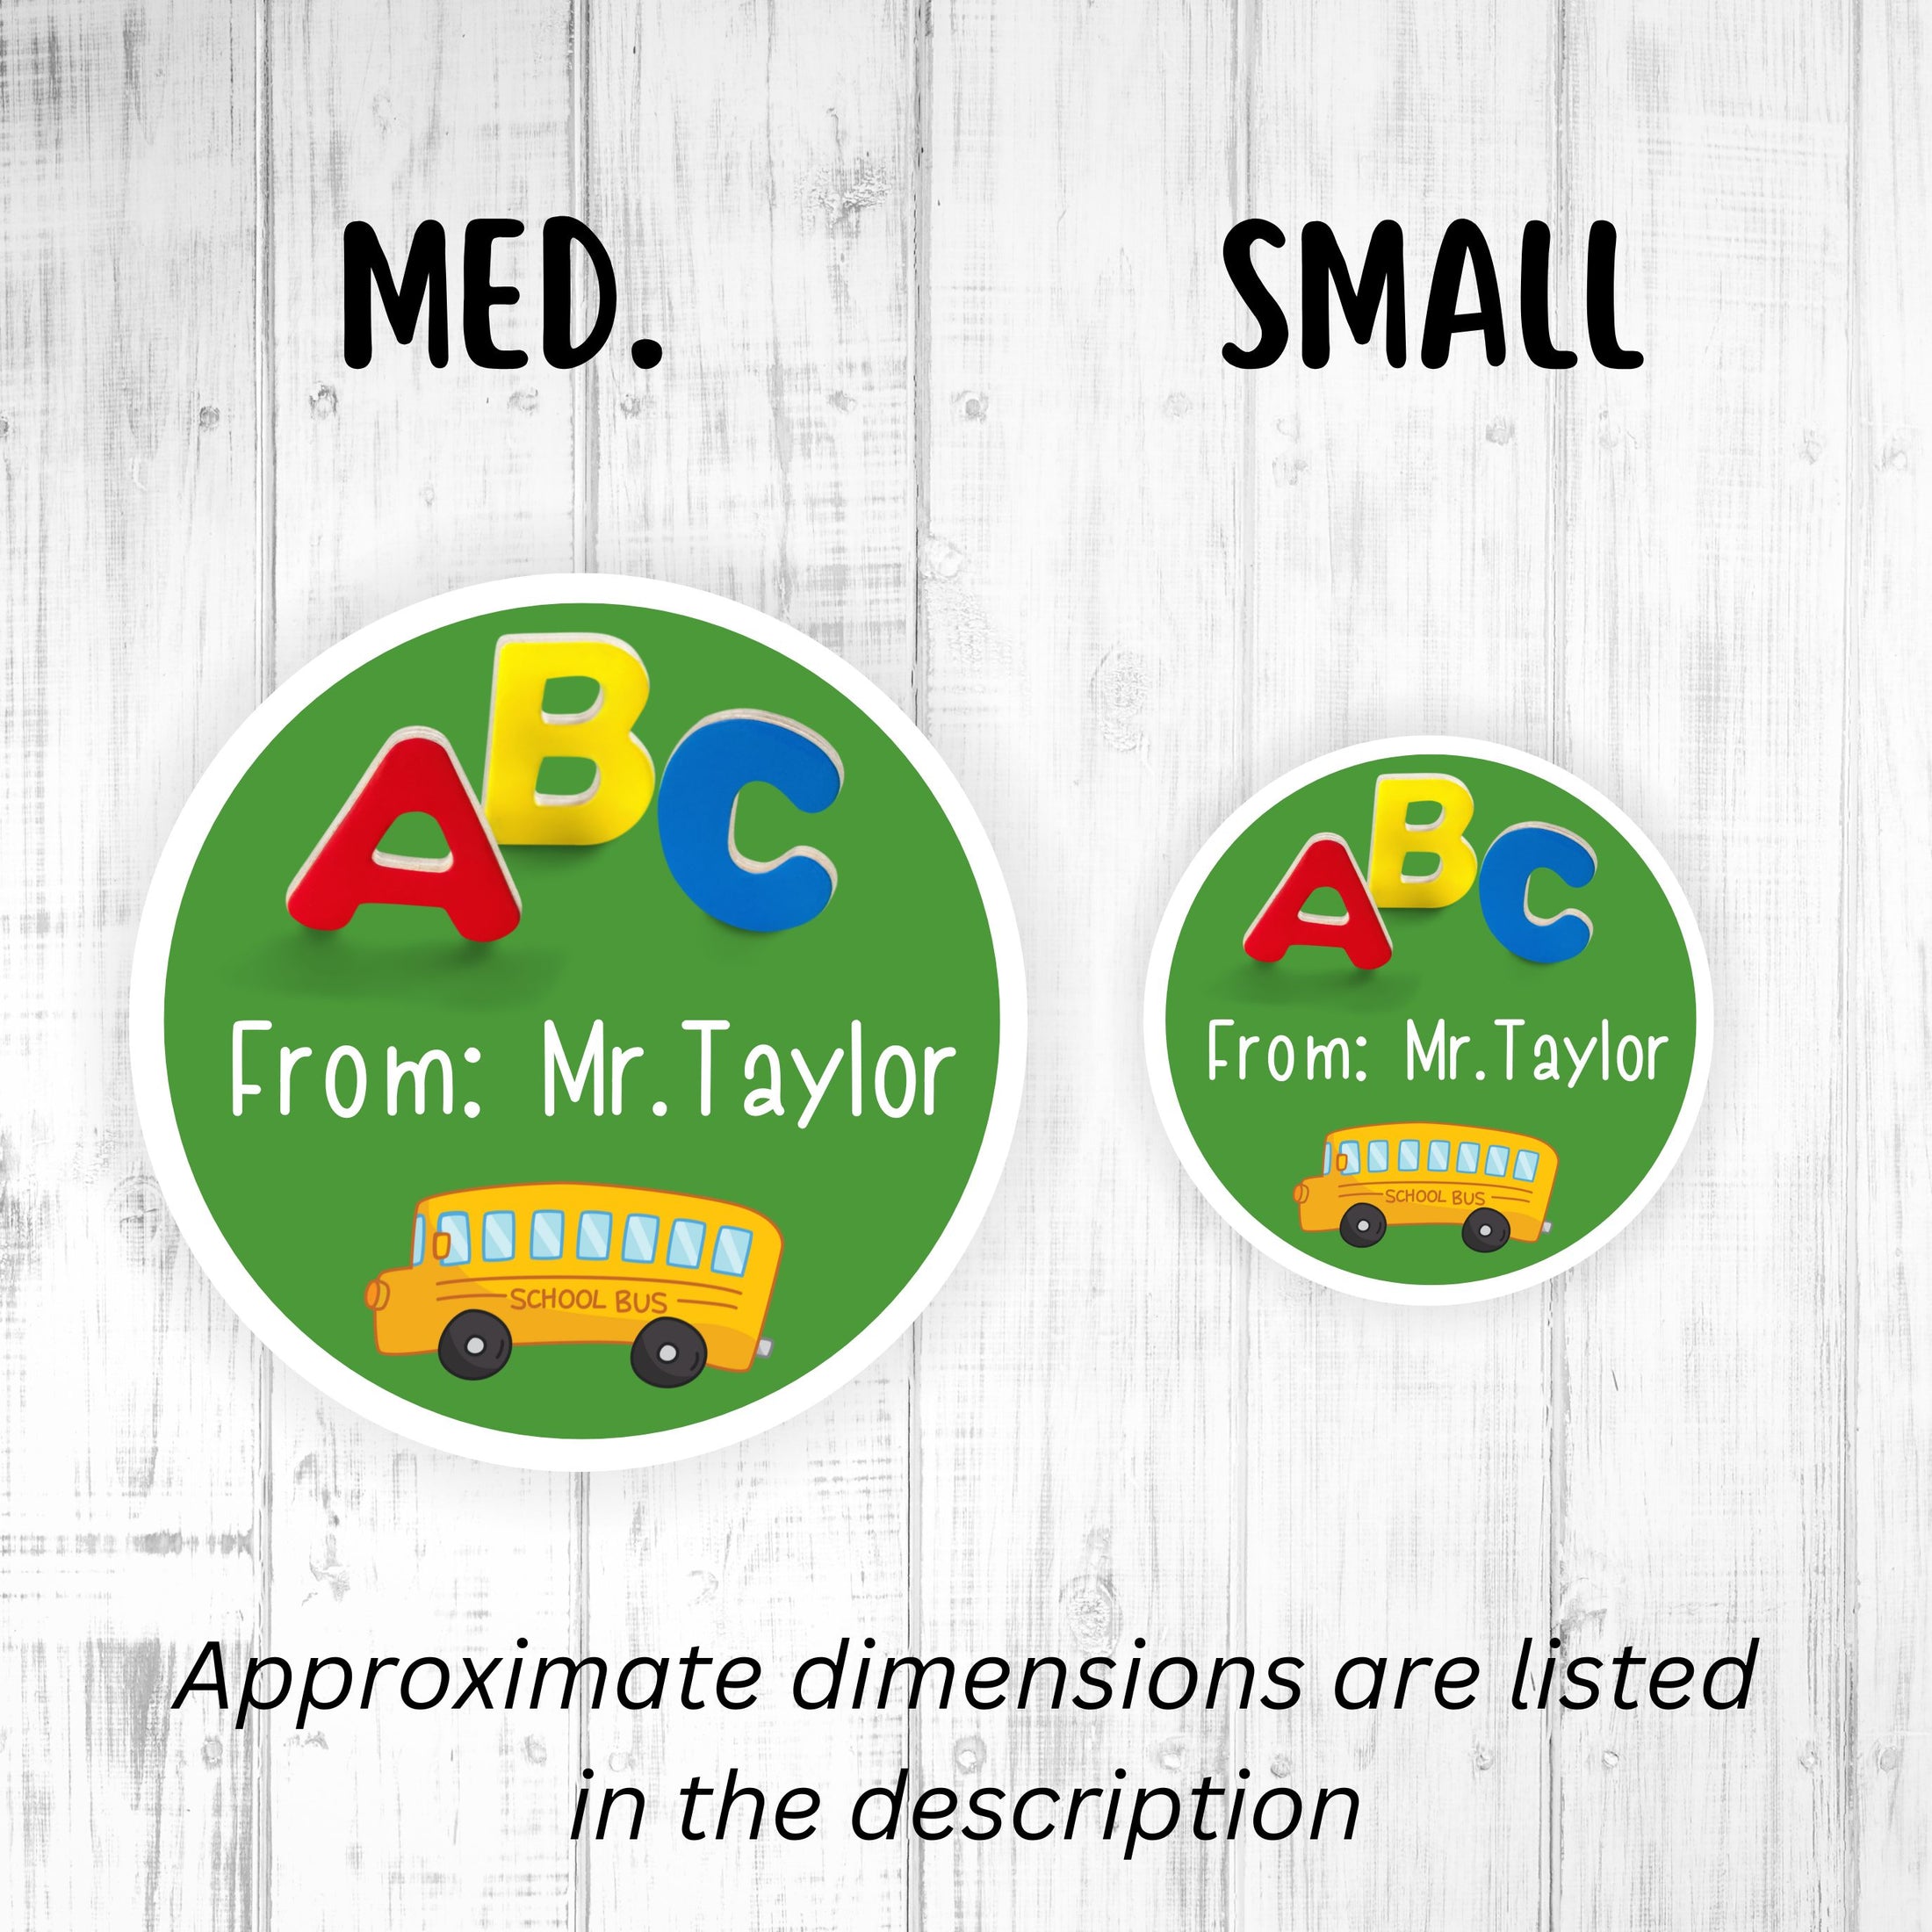 This image shows medium and small personalized school stickers next to each other as a size comparison.